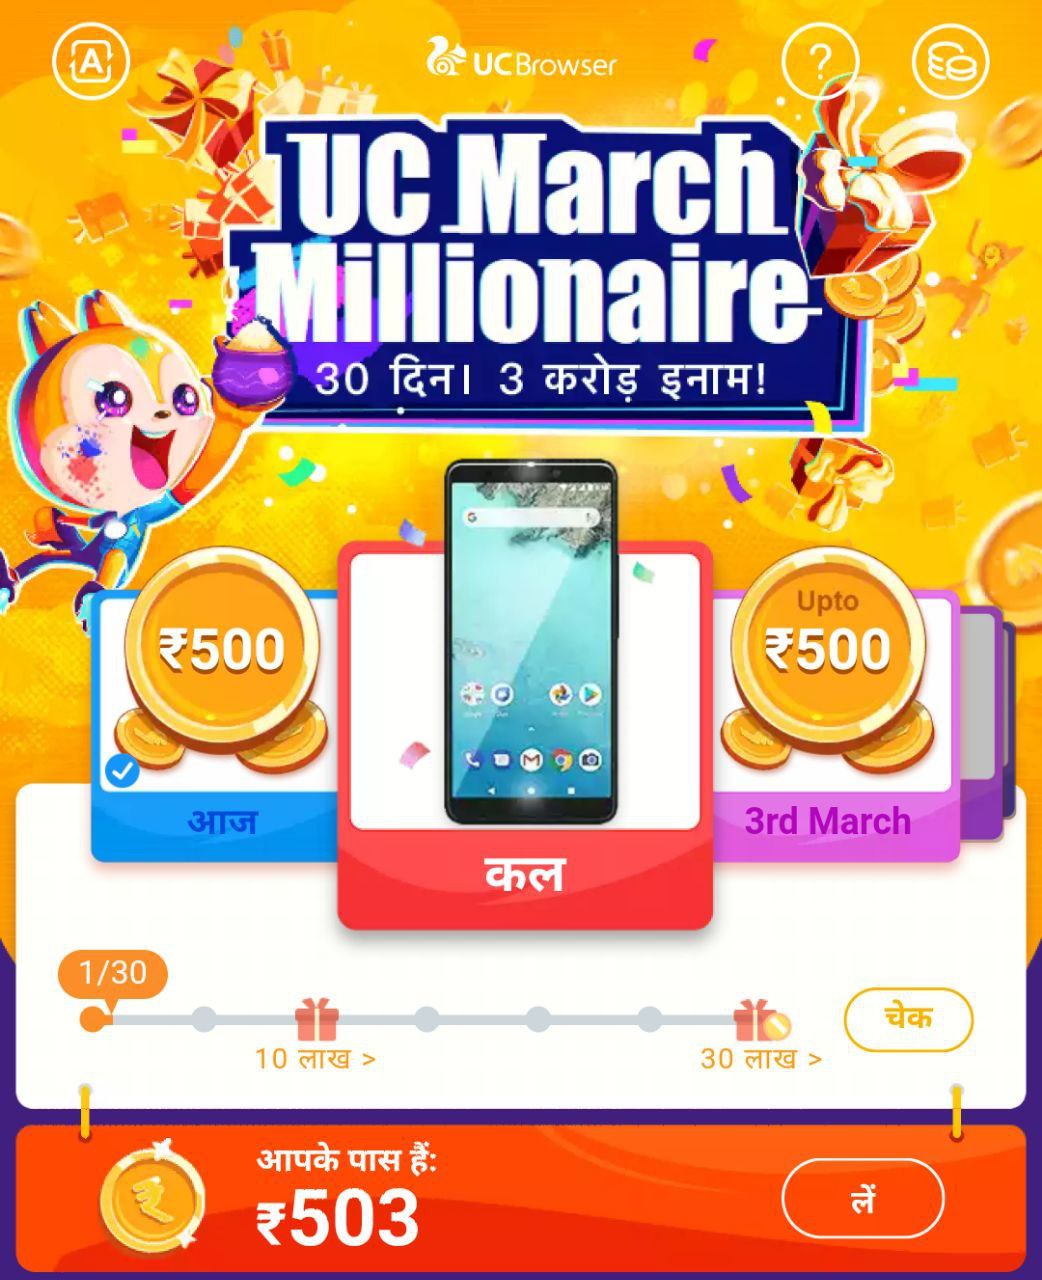 UC Browser Refer Earn March Millionaire Offer